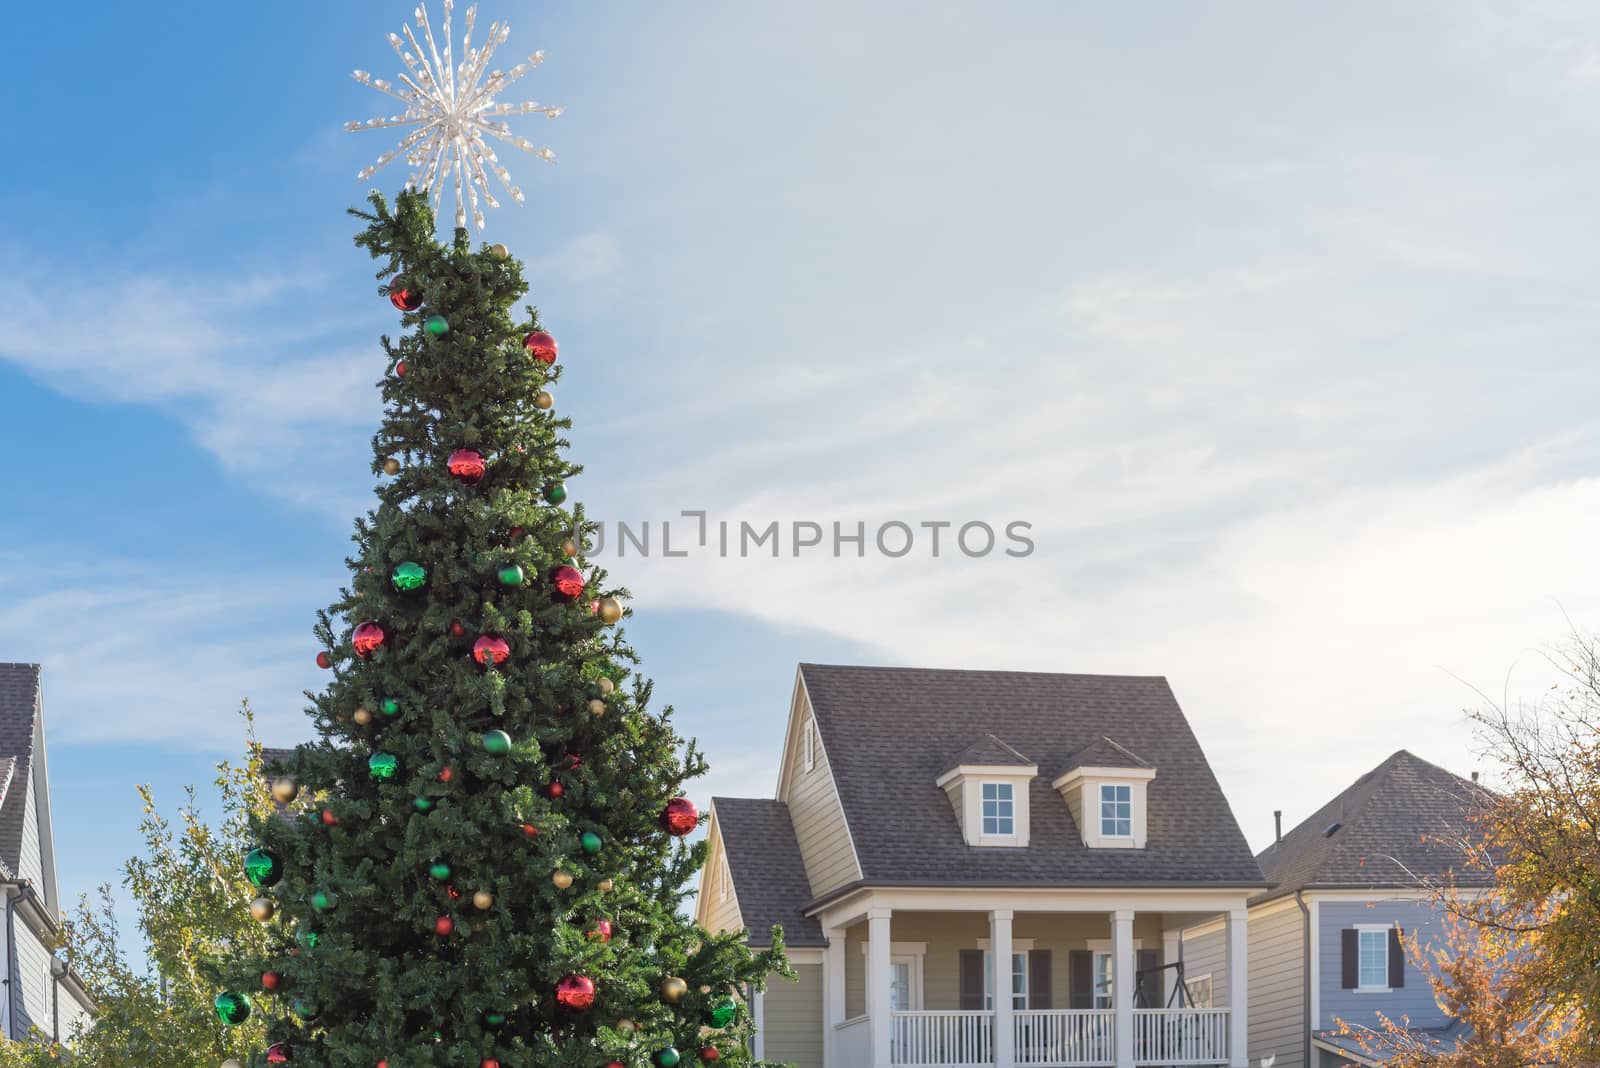 Christmas tree with snowflake tree topper and colorful glass ornaments balls at daytime by trongnguyen